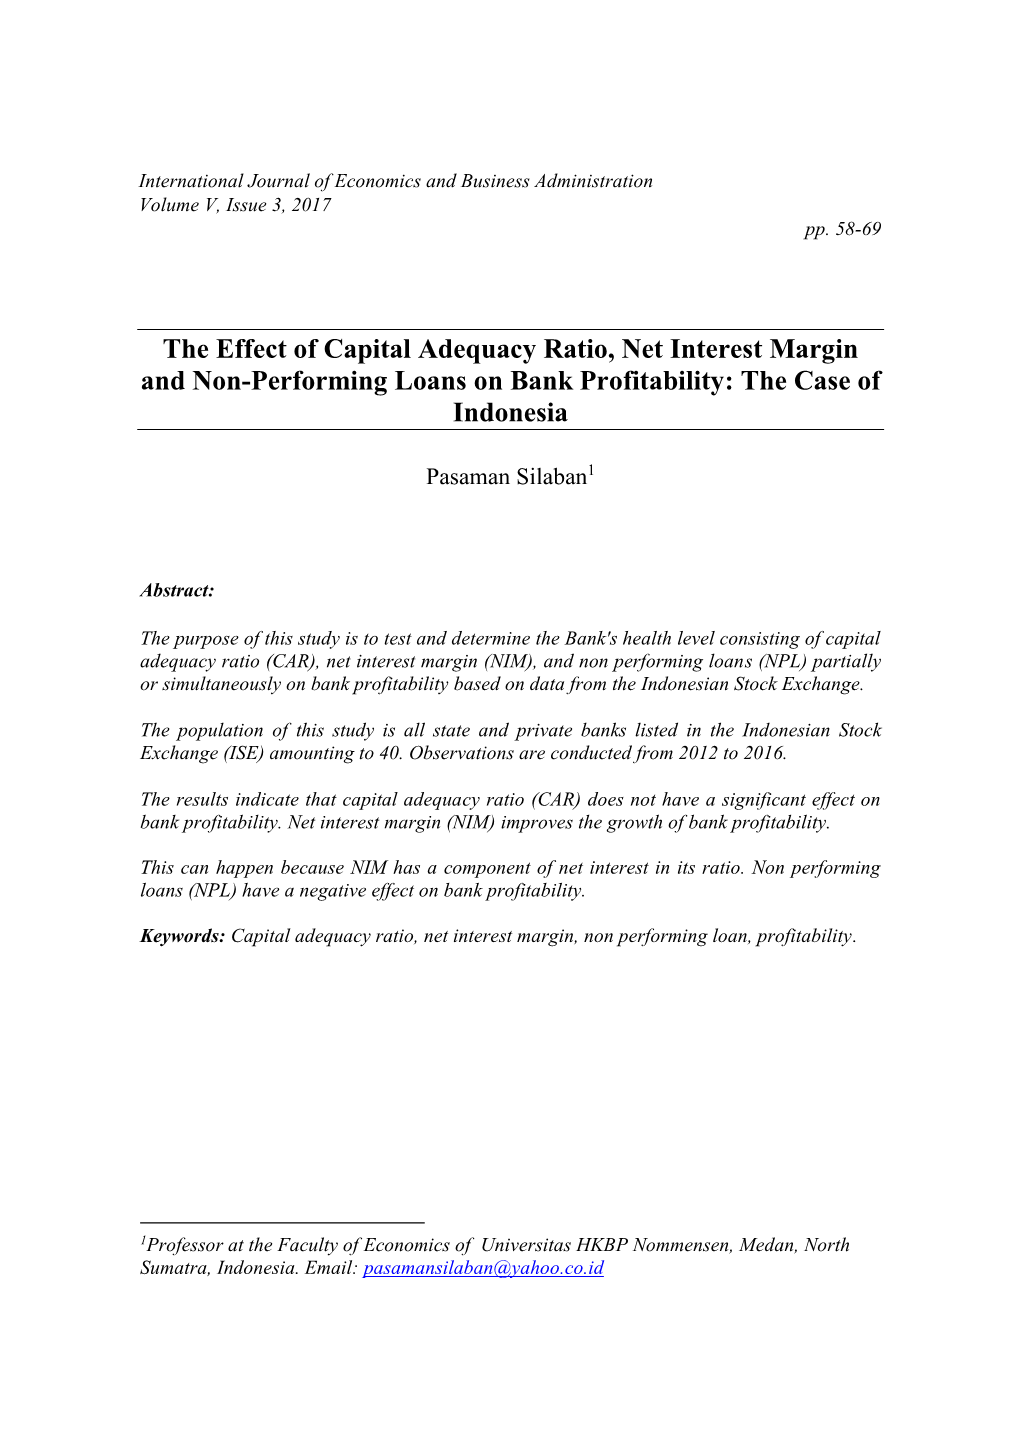 The Effect of Capital Adequacy Ratio, Net Interest Margin and Non-Performing Loans on Bank Profitability: the Case of Indonesia